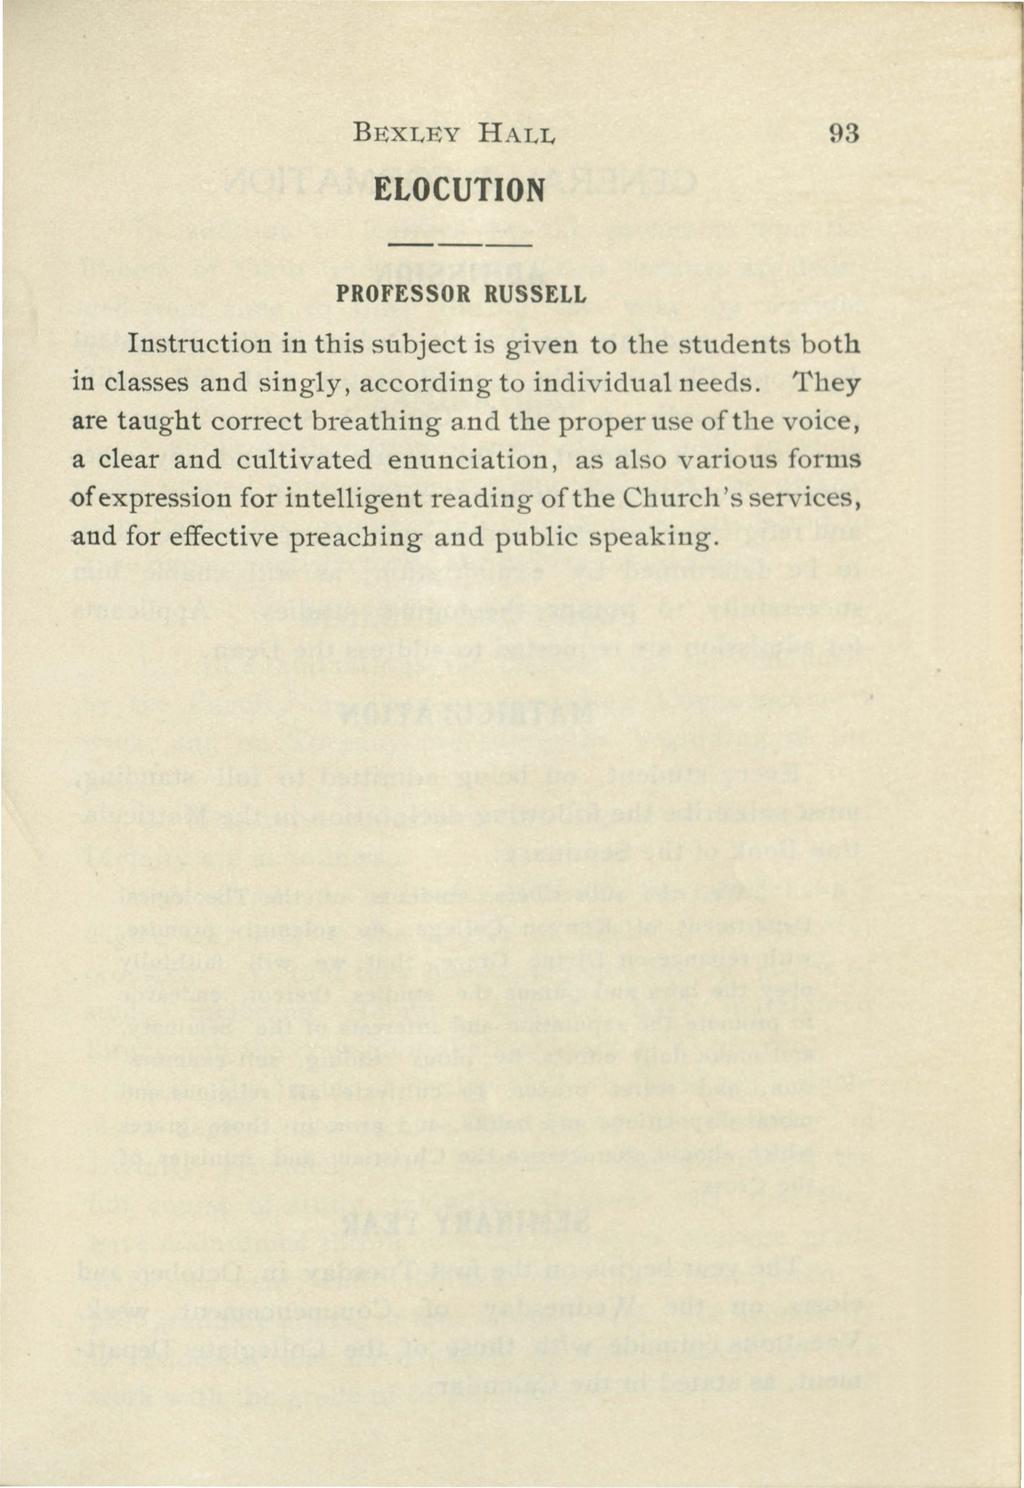 BEXLEY HALL 93 ELOCUTION PROFESSOR RUSSELL Instruction in this subject is given to the students both in classes and singly, according to individual needs.